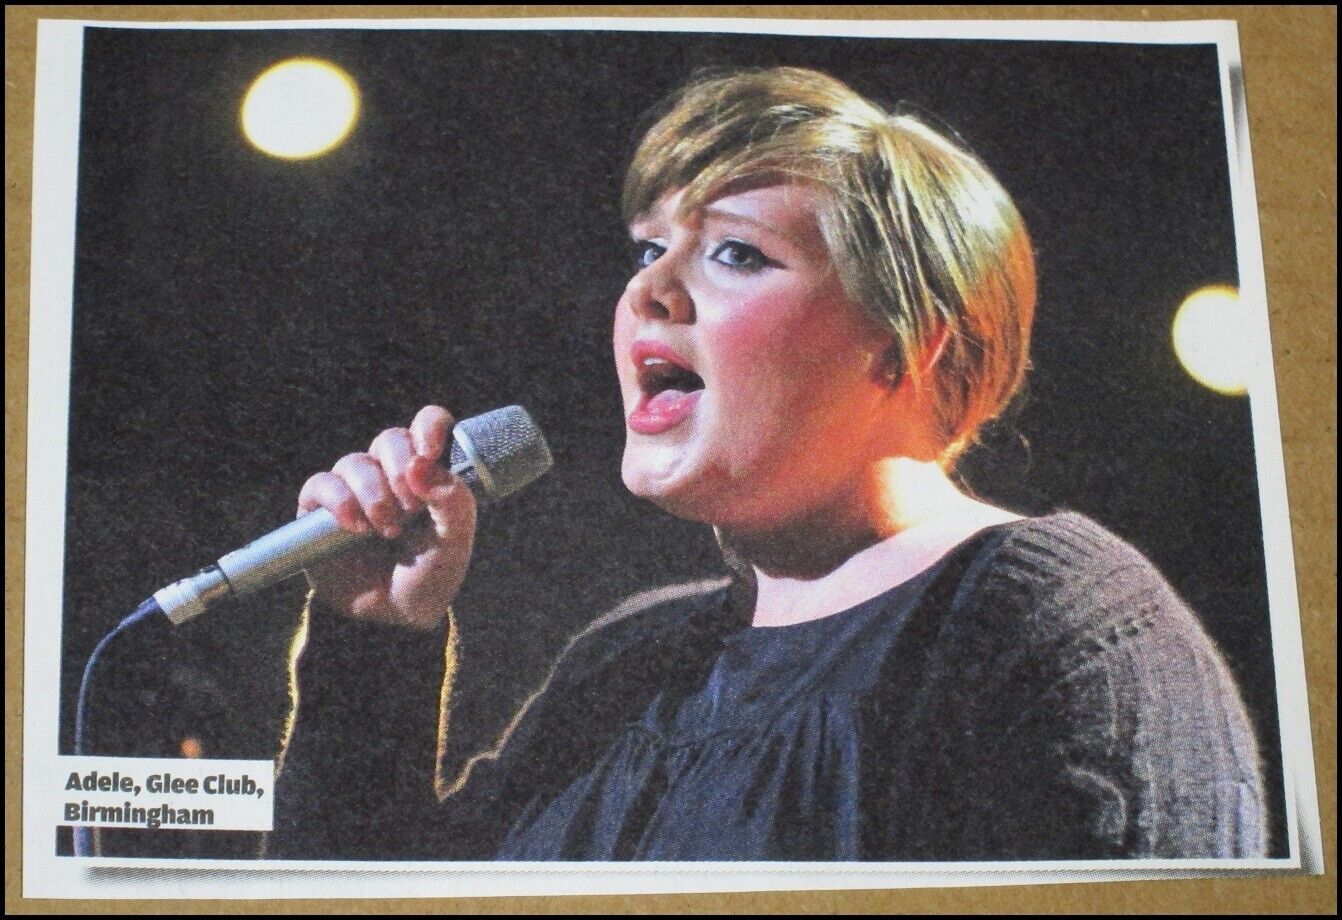 2008 Adele NME Photo Clipping 4.5\